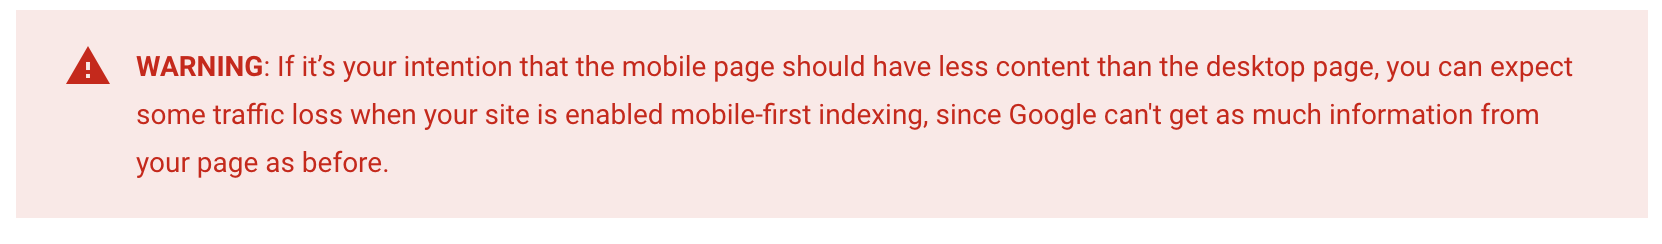 Mobile first indexing warning